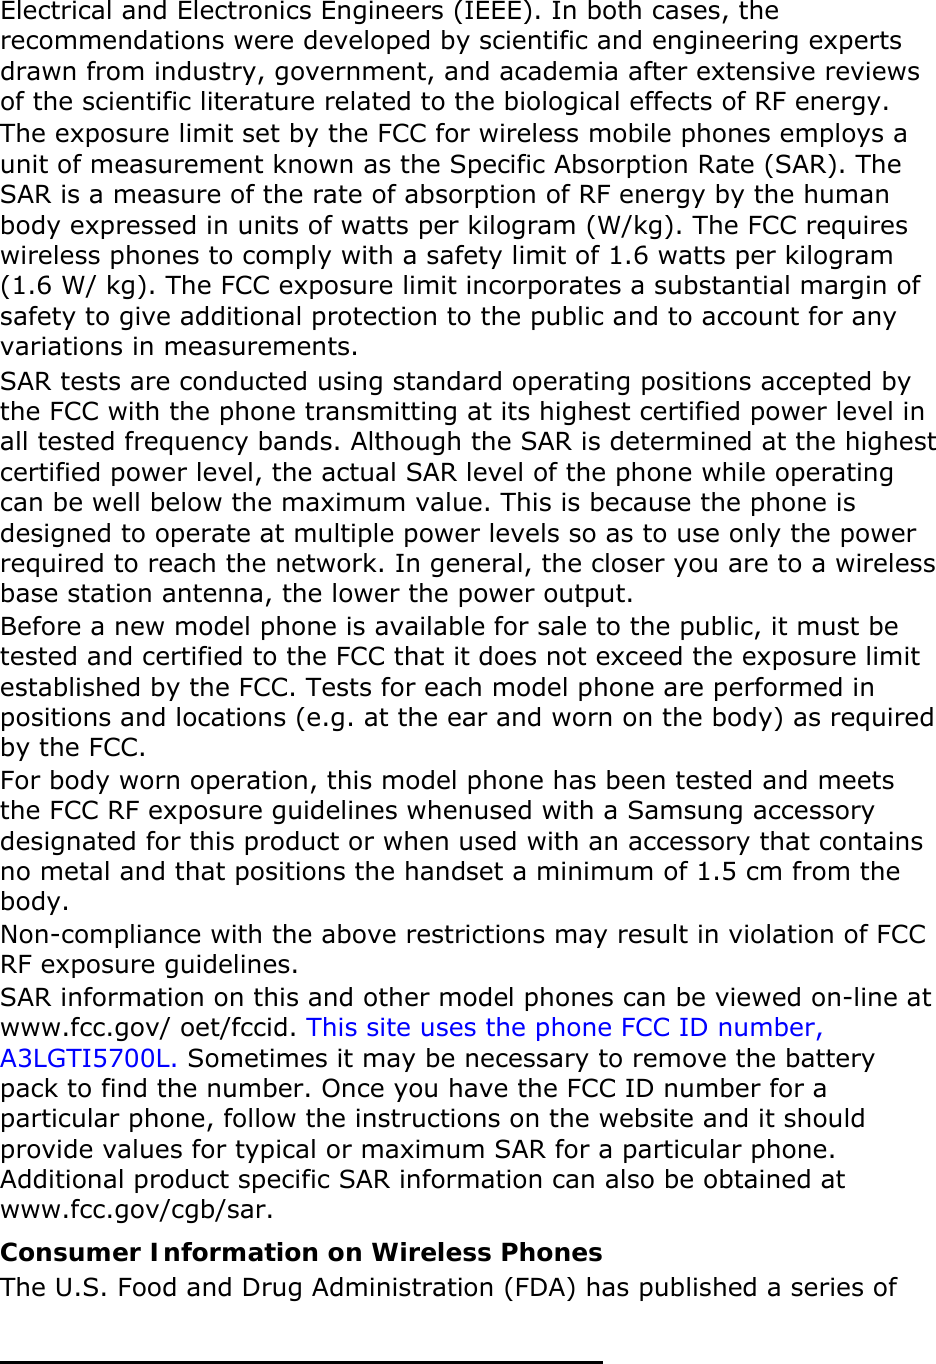   Electrical and Electronics Engineers (IEEE). In both cases, the recommendations were developed by scientific and engineering experts drawn from industry, government, and academia after extensive reviews of the scientific literature related to the biological effects of RF energy. The exposure limit set by the FCC for wireless mobile phones employs a unit of measurement known as the Specific Absorption Rate (SAR). The SAR is a measure of the rate of absorption of RF energy by the human body expressed in units of watts per kilogram (W/kg). The FCC requires wireless phones to comply with a safety limit of 1.6 watts per kilogram (1.6 W/ kg). The FCC exposure limit incorporates a substantial margin of safety to give additional protection to the public and to account for any variations in measurements. SAR tests are conducted using standard operating positions accepted by the FCC with the phone transmitting at its highest certified power level in all tested frequency bands. Although the SAR is determined at the highest certified power level, the actual SAR level of the phone while operating can be well below the maximum value. This is because the phone is designed to operate at multiple power levels so as to use only the power required to reach the network. In general, the closer you are to a wireless base station antenna, the lower the power output. Before a new model phone is available for sale to the public, it must be tested and certified to the FCC that it does not exceed the exposure limit established by the FCC. Tests for each model phone are performed in positions and locations (e.g. at the ear and worn on the body) as required by the FCC.     For body worn operation, this model phone has been tested and meets the FCC RF exposure guidelines whenused with a Samsung accessory designated for this product or when used with an accessory that contains no metal and that positions the handset a minimum of 1.5 cm from the body.  Non-compliance with the above restrictions may result in violation of FCC RF exposure guidelines. SAR information on this and other model phones can be viewed on-line at www.fcc.gov/ oet/fccid. This site uses the phone FCC ID number, A3LGTI5700L. Sometimes it may be necessary to remove the battery pack to find the number. Once you have the FCC ID number for a particular phone, follow the instructions on the website and it should provide values for typical or maximum SAR for a particular phone. Additional product specific SAR information can also be obtained at www.fcc.gov/cgb/sar. Consumer Information on Wireless Phones The U.S. Food and Drug Administration (FDA) has published a series of 